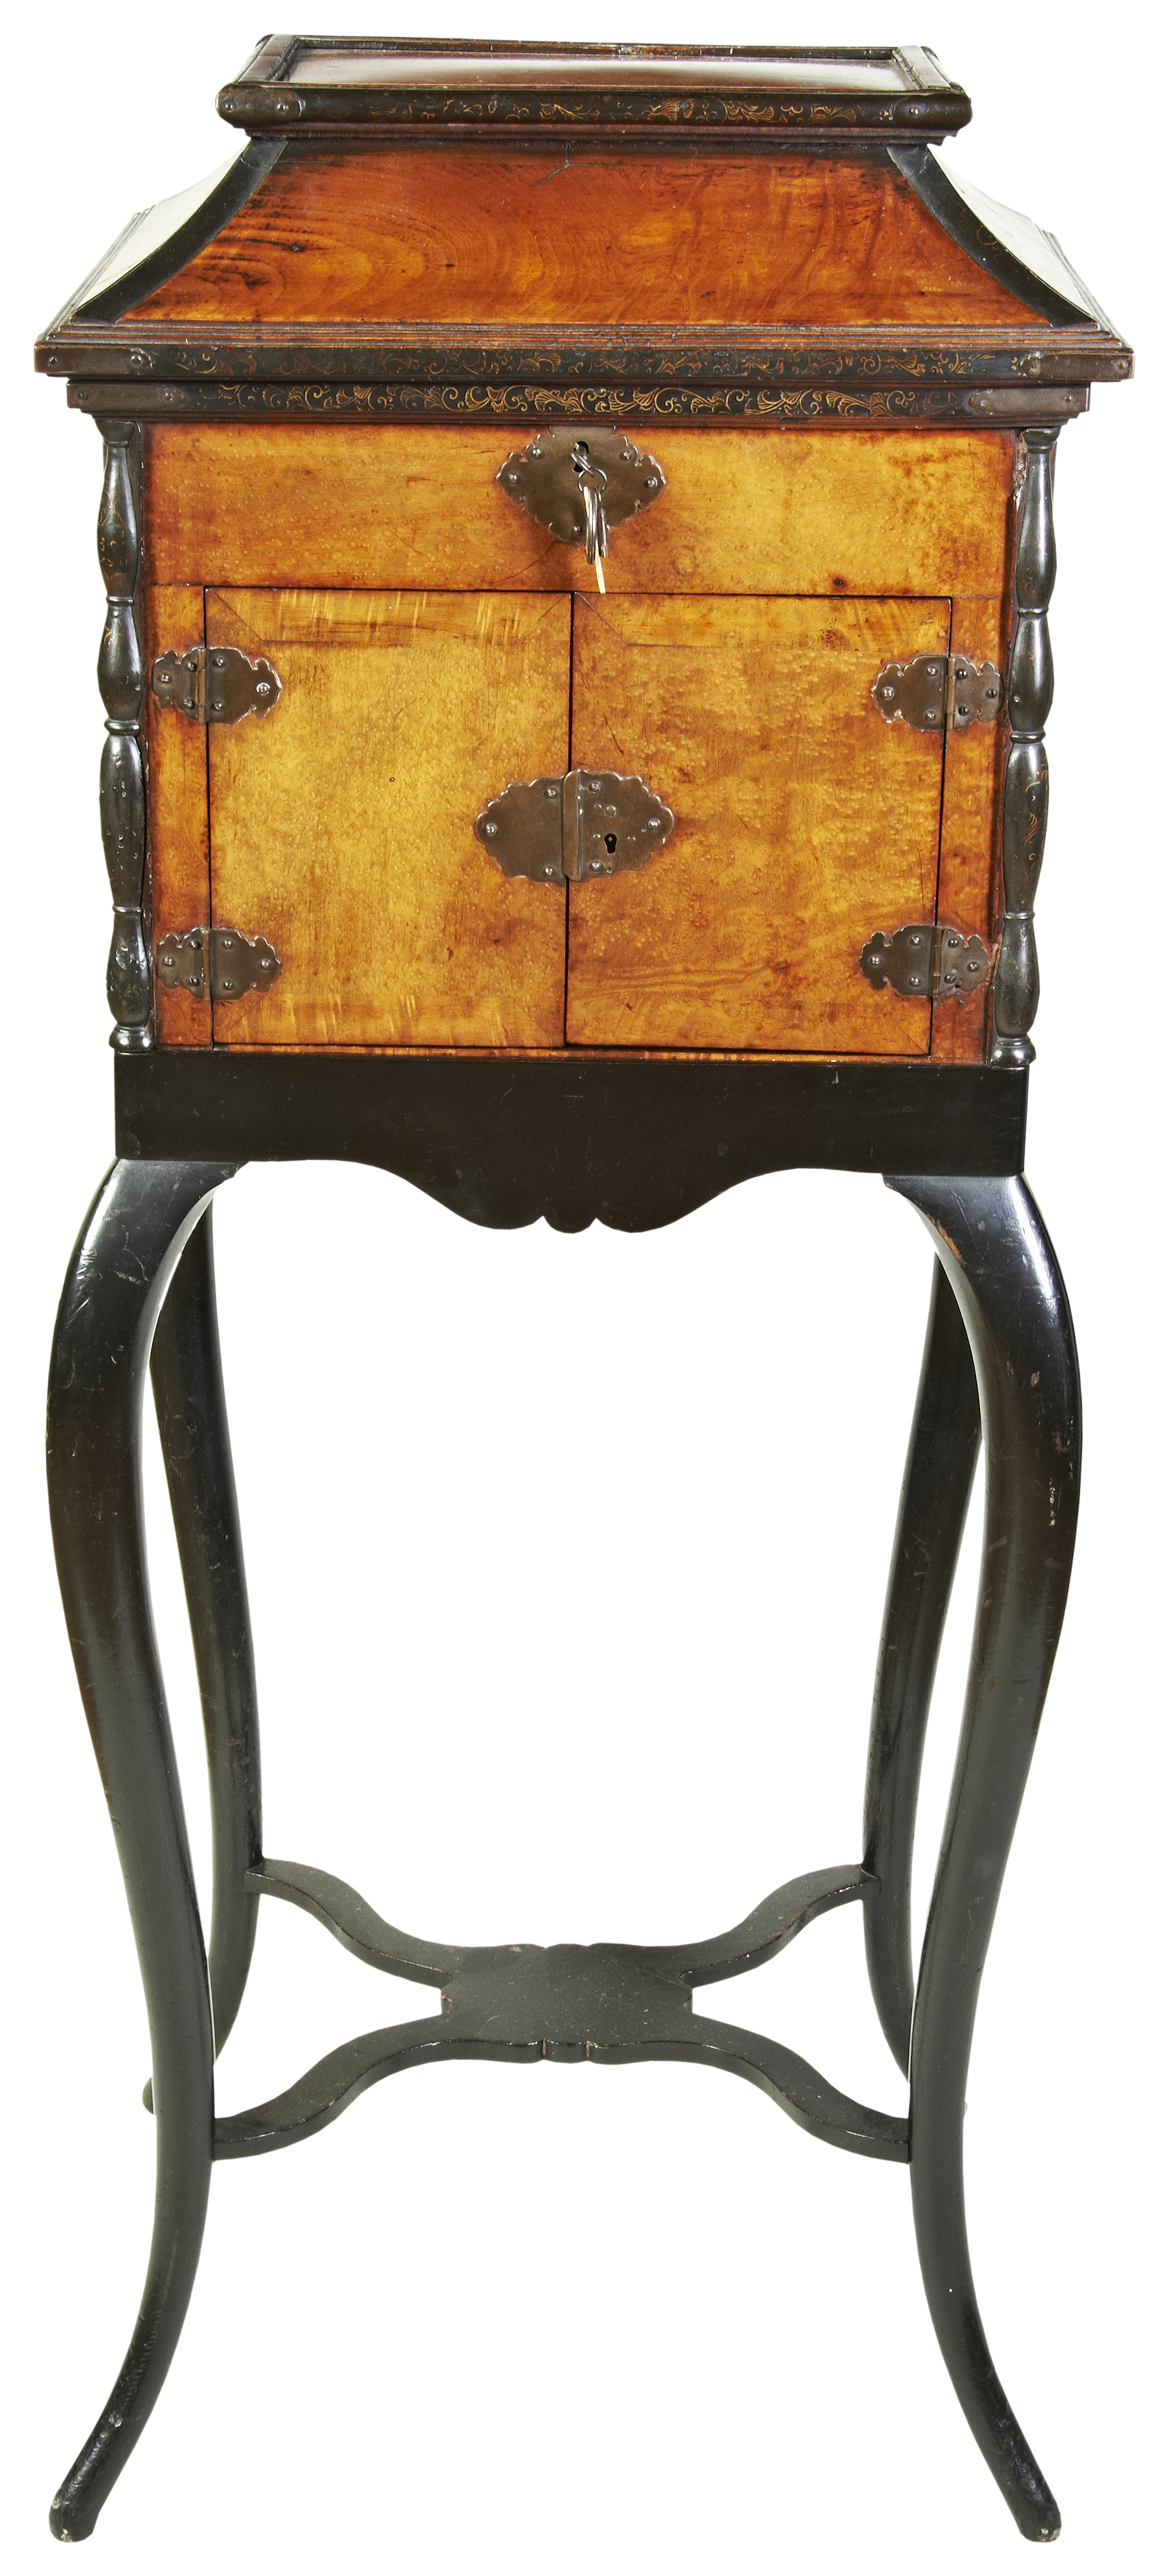 A RARE JAPANESE BURRWOOD AND BLACK LACQUER CABINET EDO PERIOD, 1640-1690 日本江户时期 黑漆箱 the hinged top - Image 3 of 3